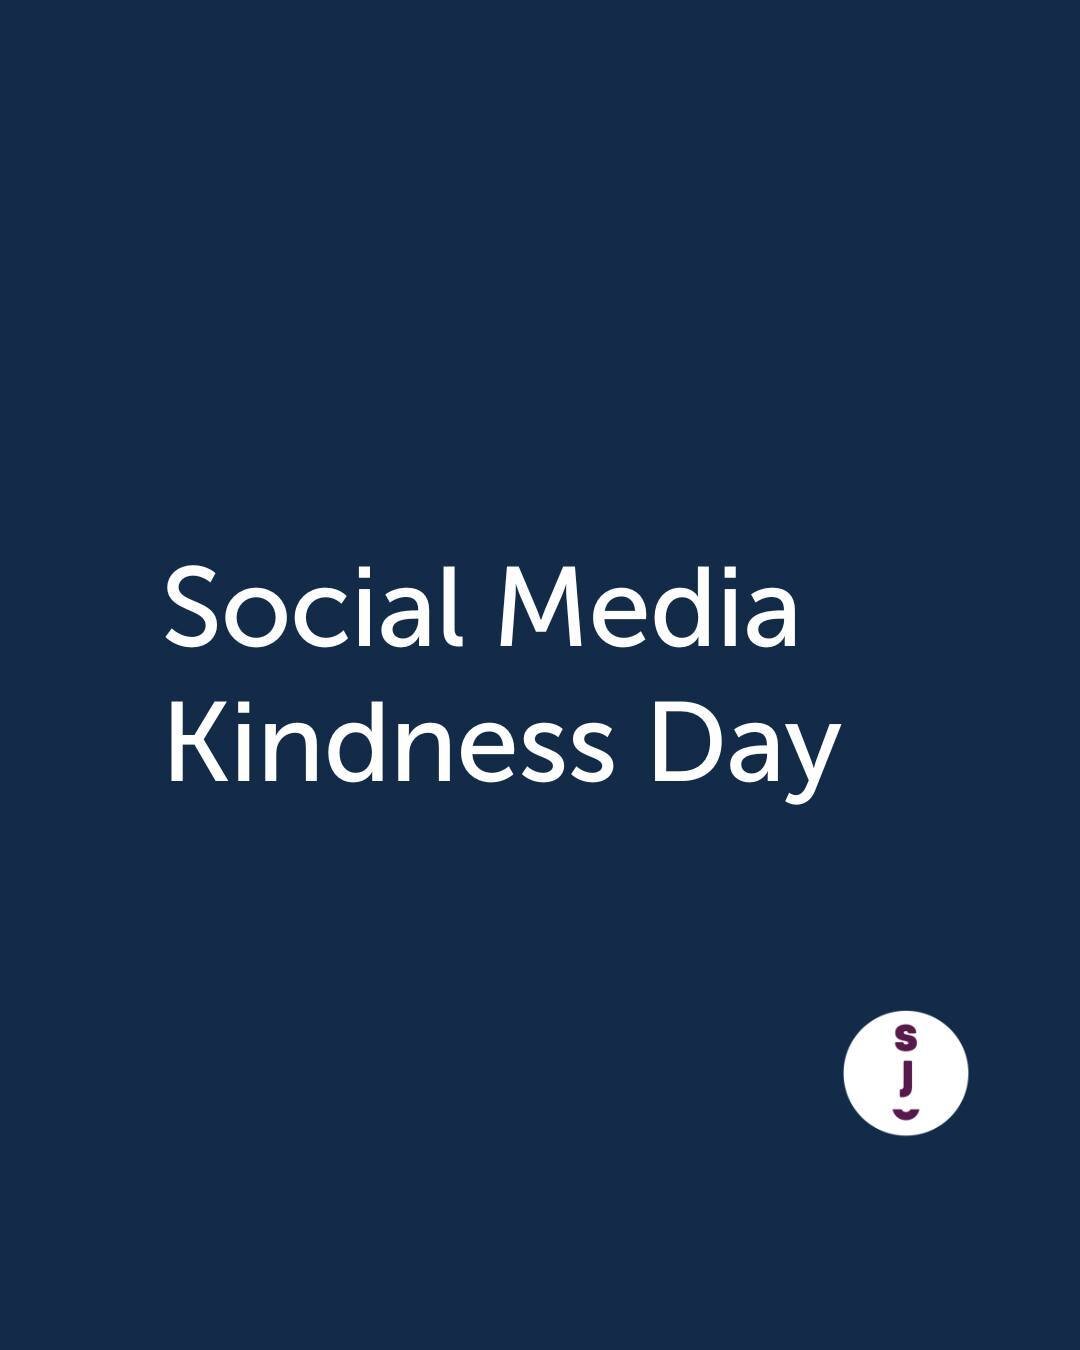 Today is Social Media Kindness Day 🤗⁠
⁠
It&rsquo;s about making social media a kinder place for all. Here are some great ways to be kind today on social media:⁠
⁠
🌼 Random acts of kindness⁠
🌼 Give compliments⁠
🌼 Share someone&rsquo;s post or prof